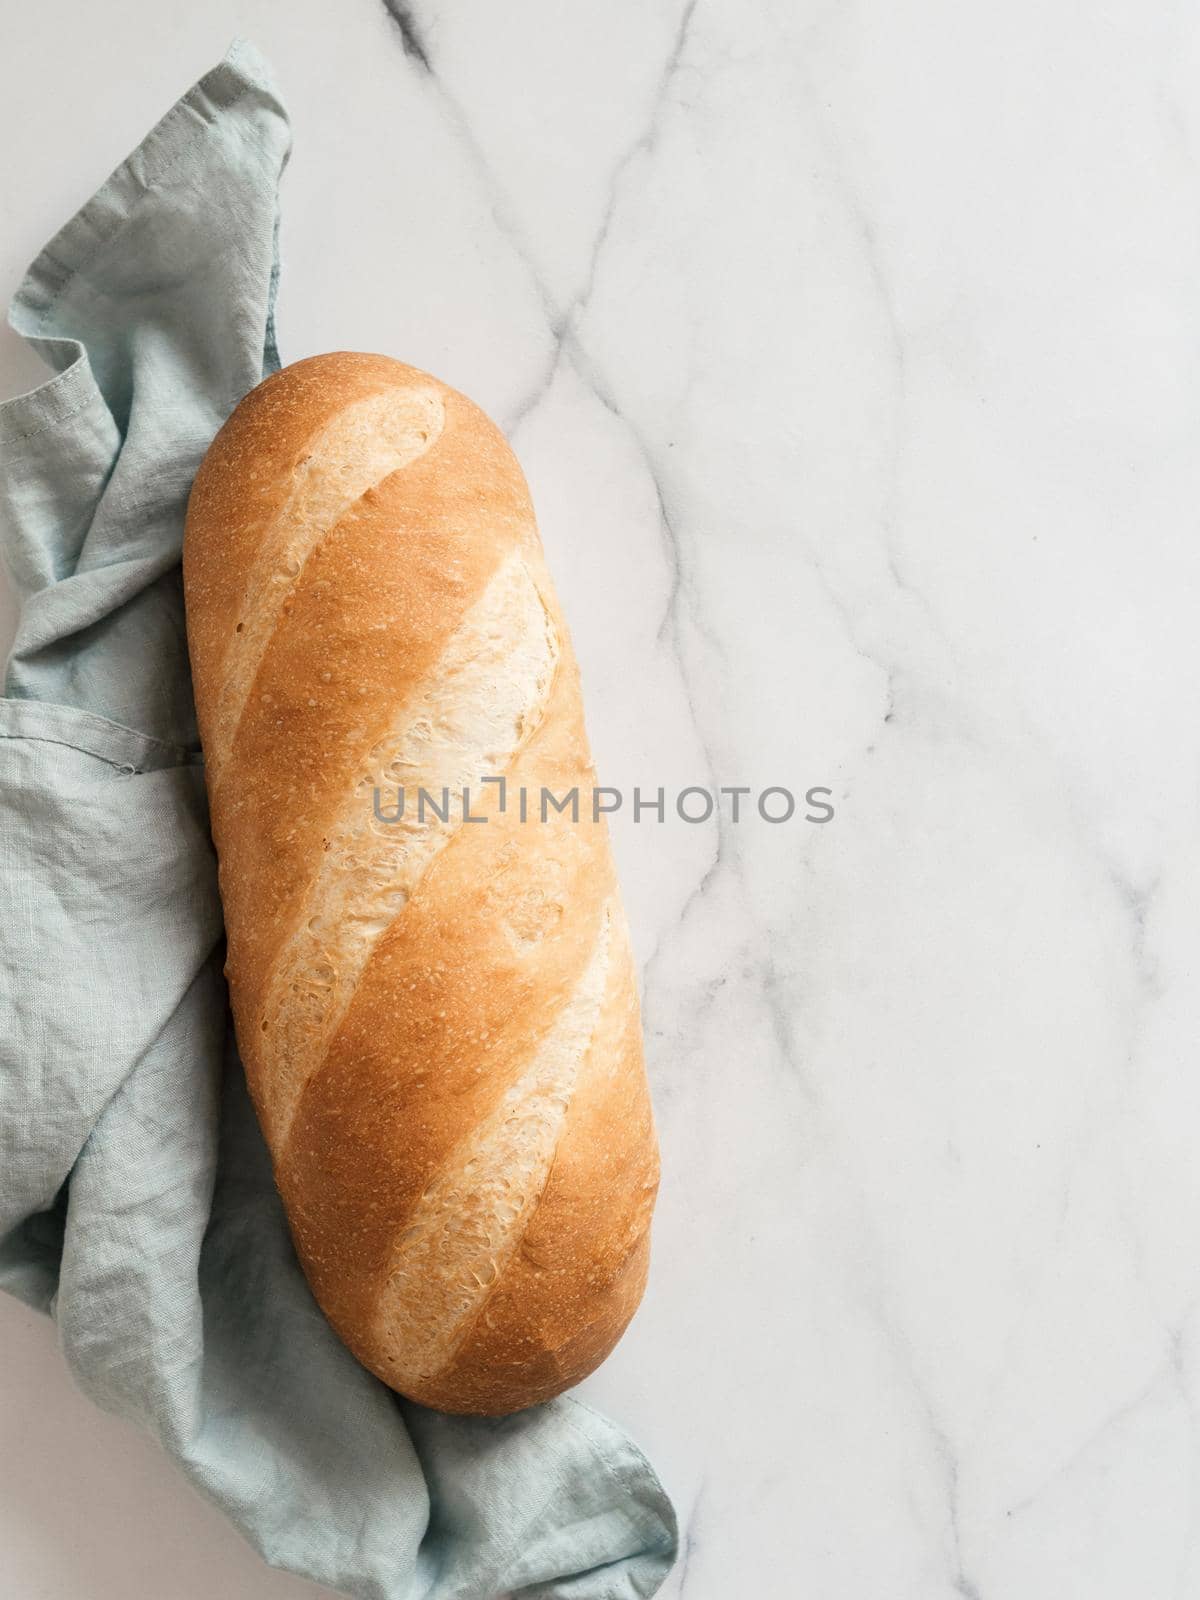 British White Bloomer or European Baton loaf bread on white marble background. Top view or flat lay. Copy space for text or design. Vertical.